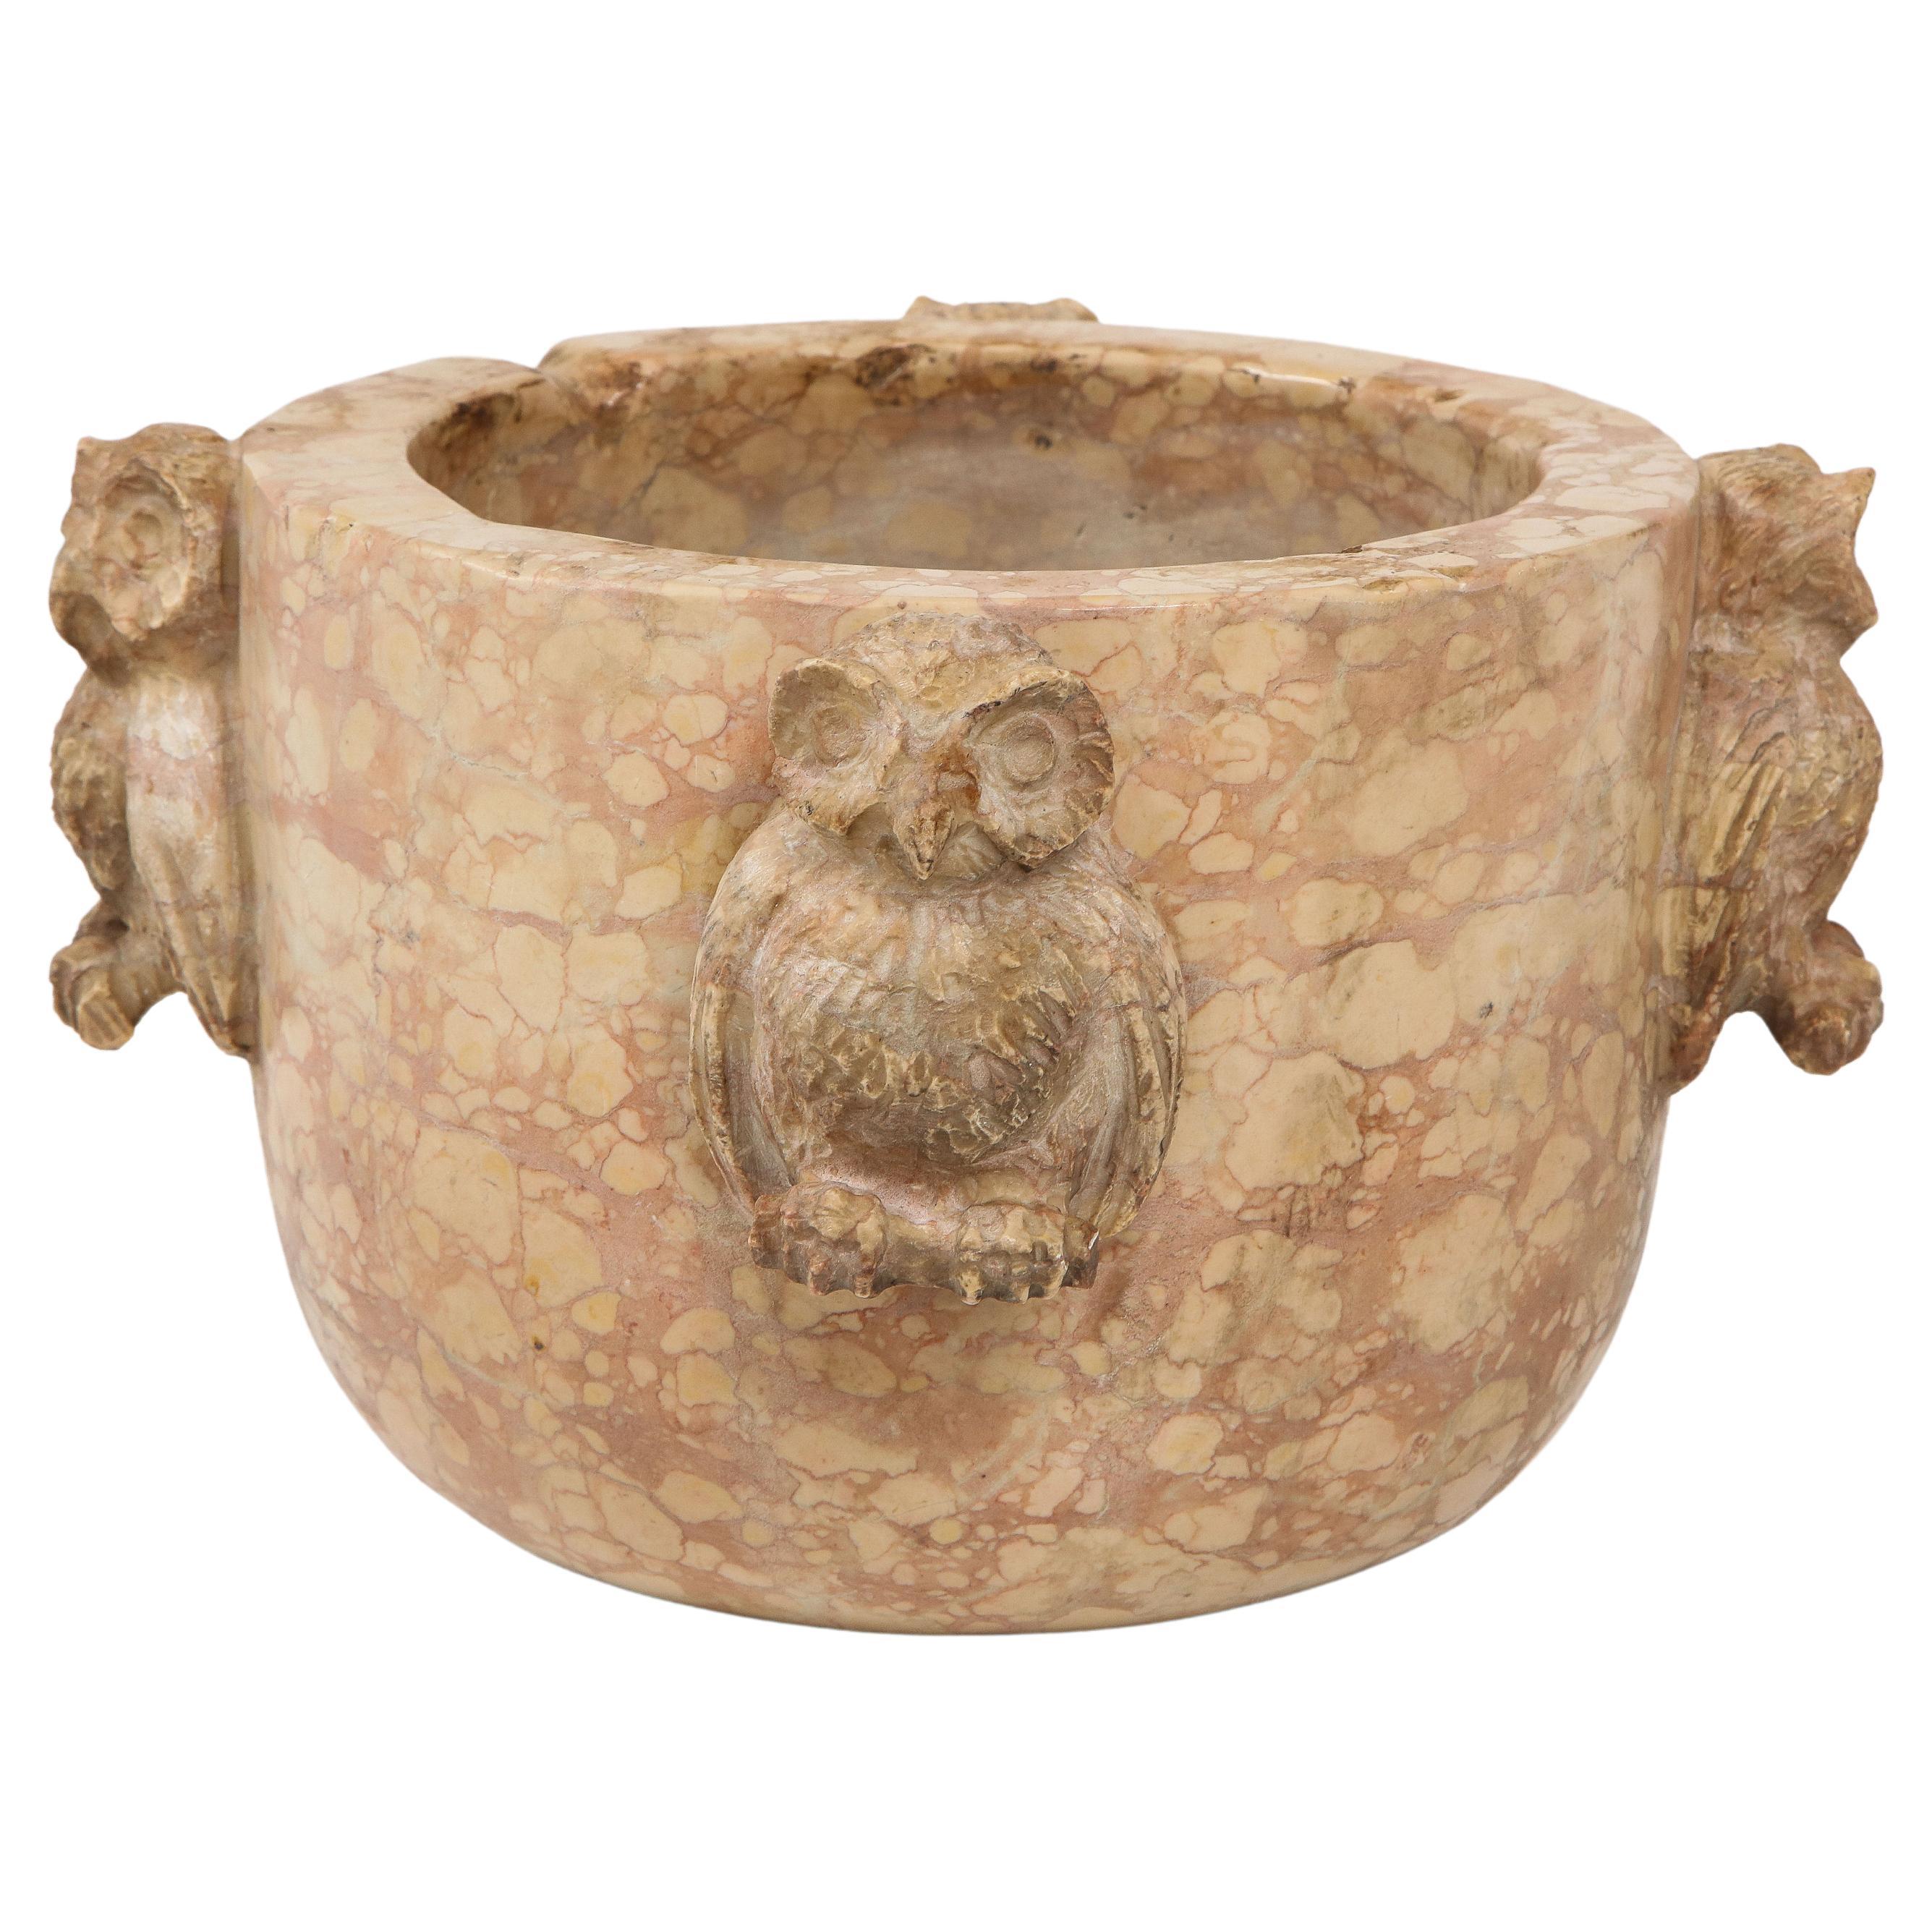 Northern Italian 17th Century Marble Mortar with Carved Owl Decoration